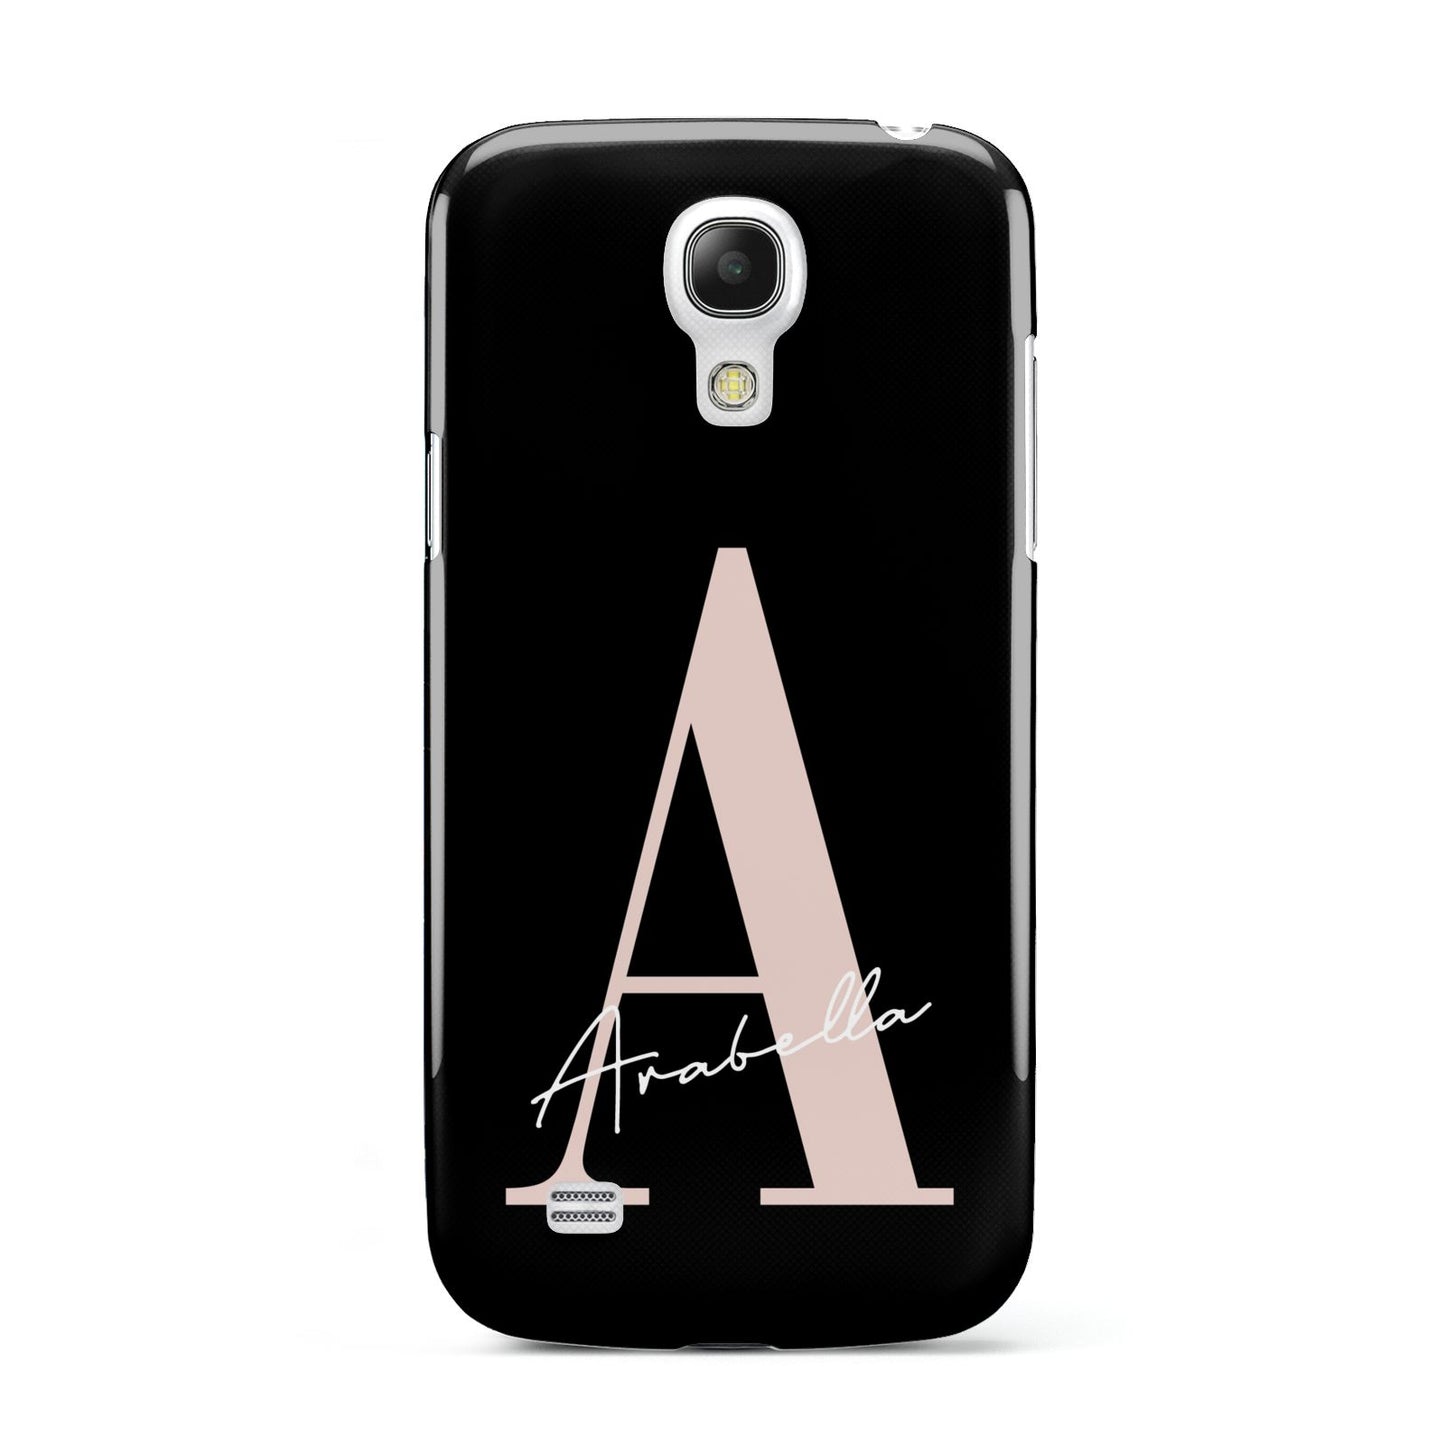 Personalised Black Pink Initial Samsung Galaxy S4 Mini Case